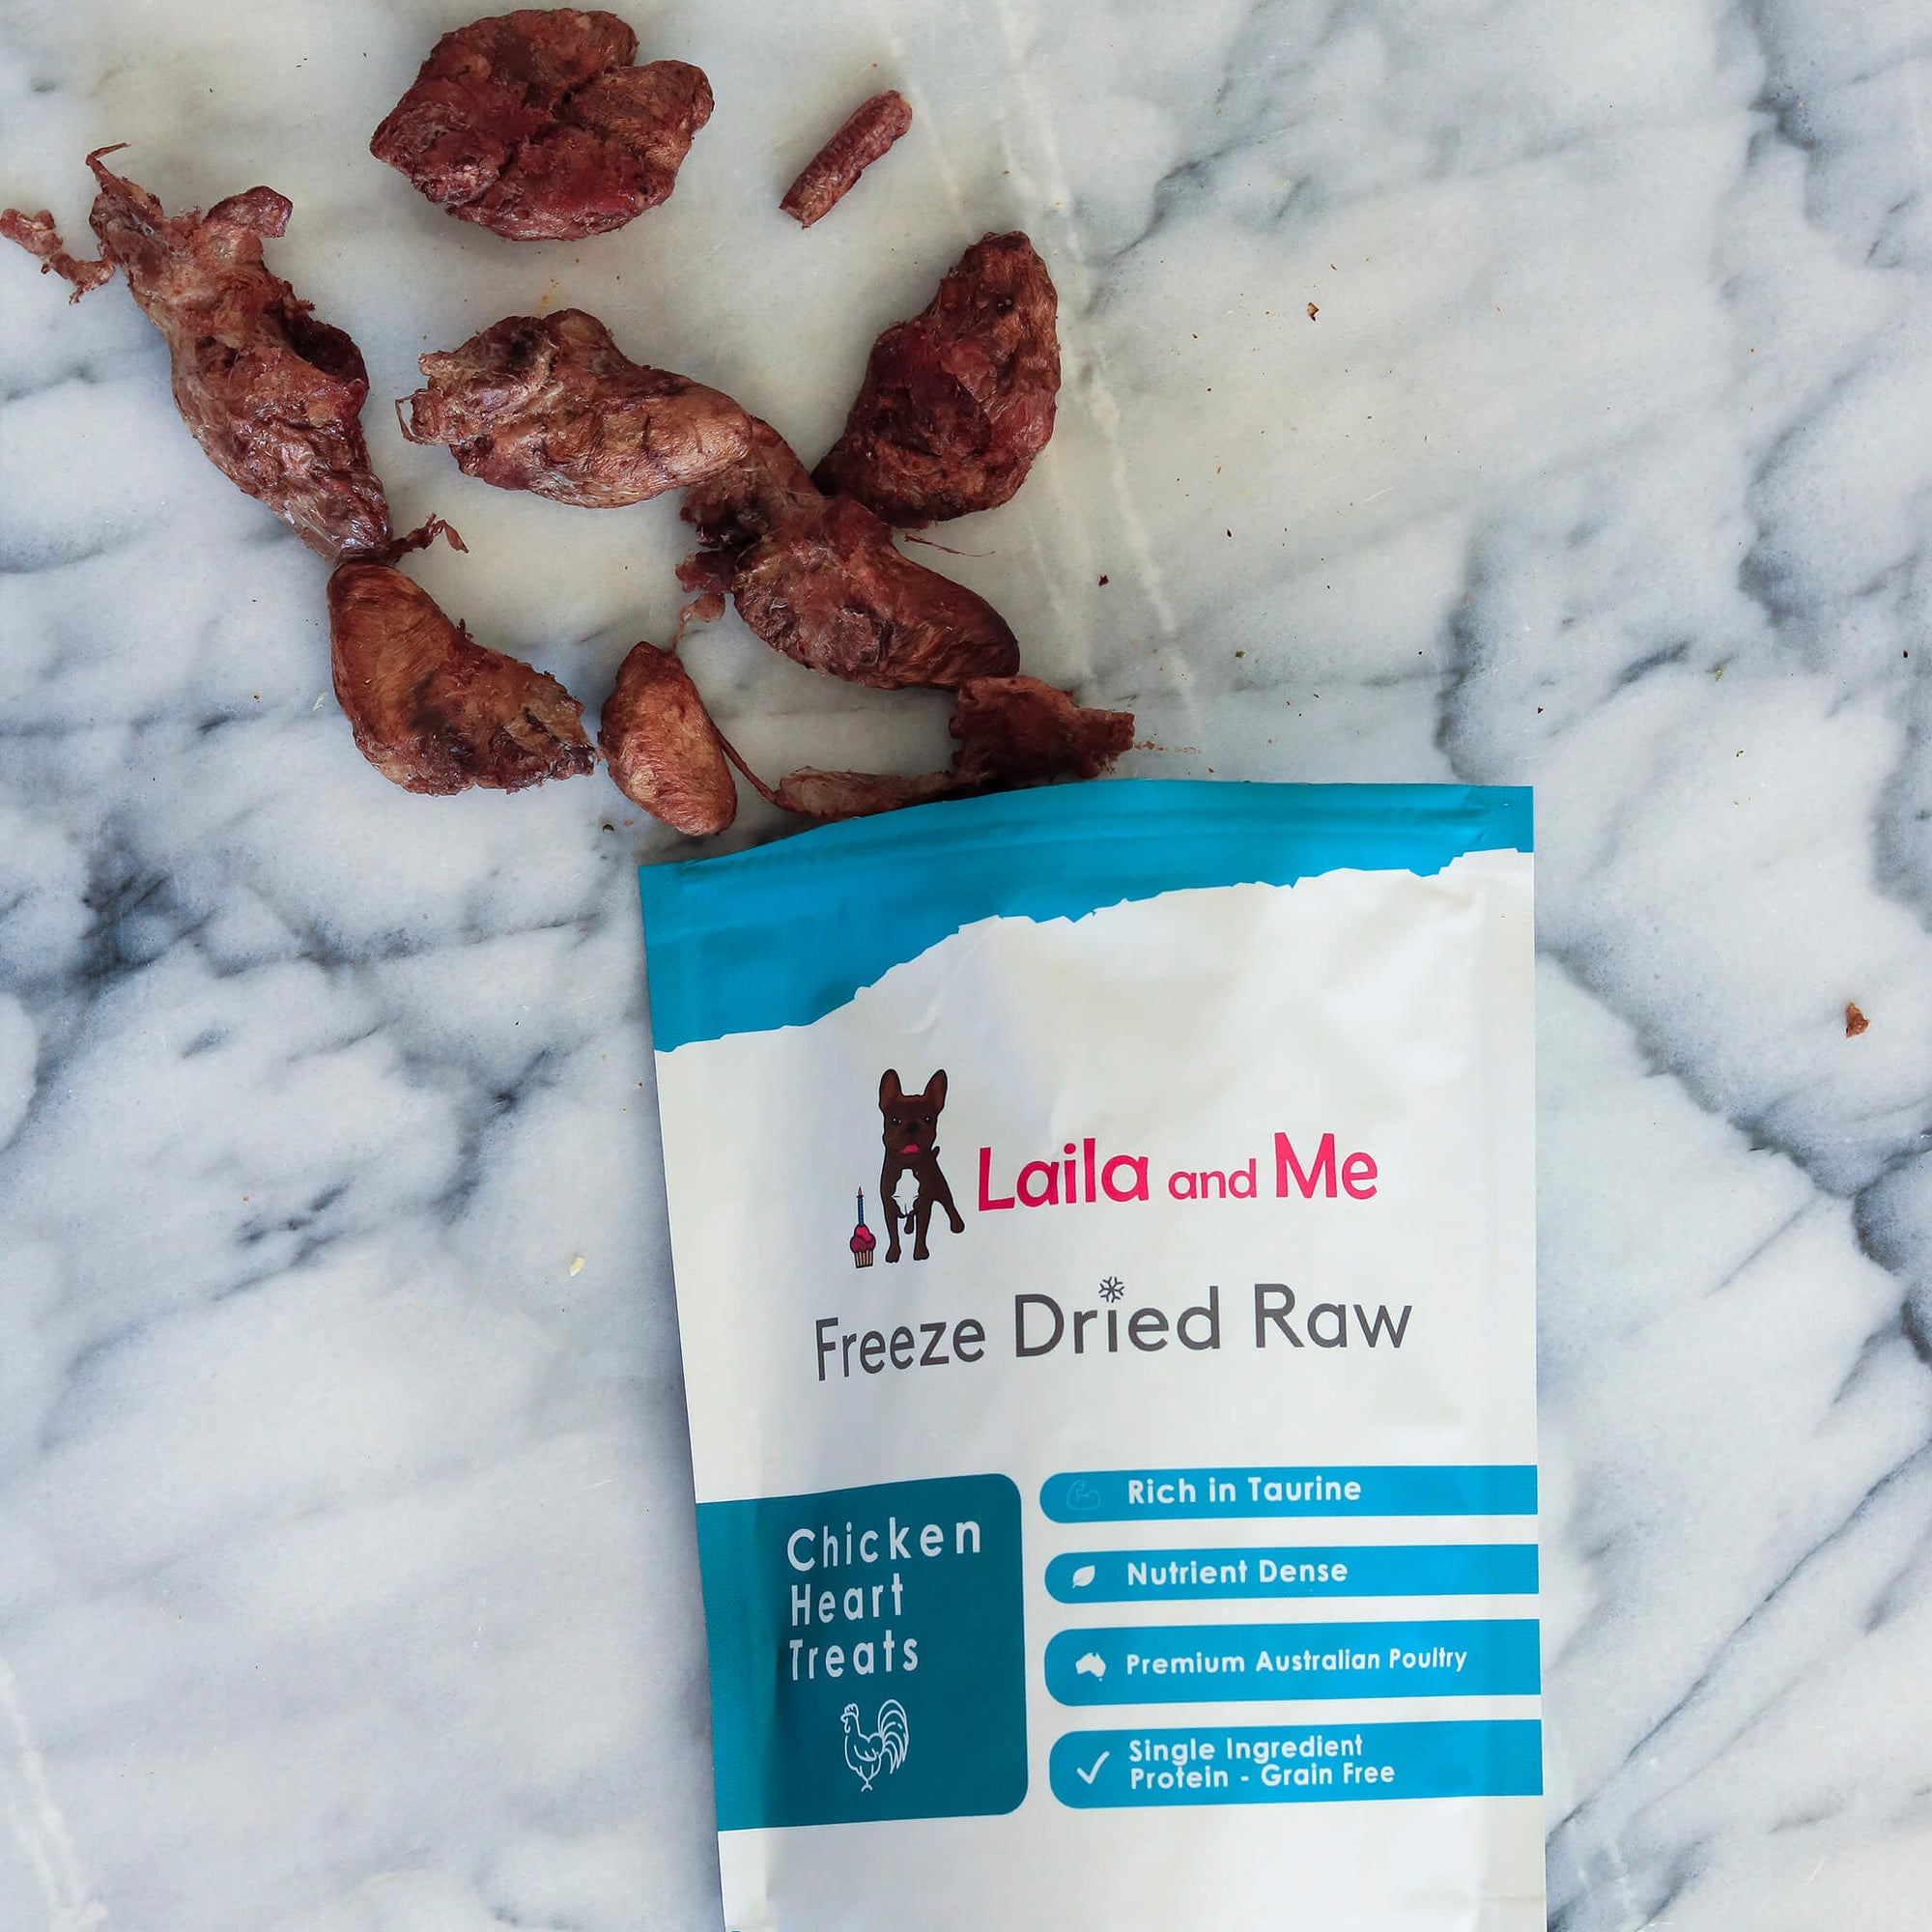 chicken heart pet treats that are freeze dried - laila and me